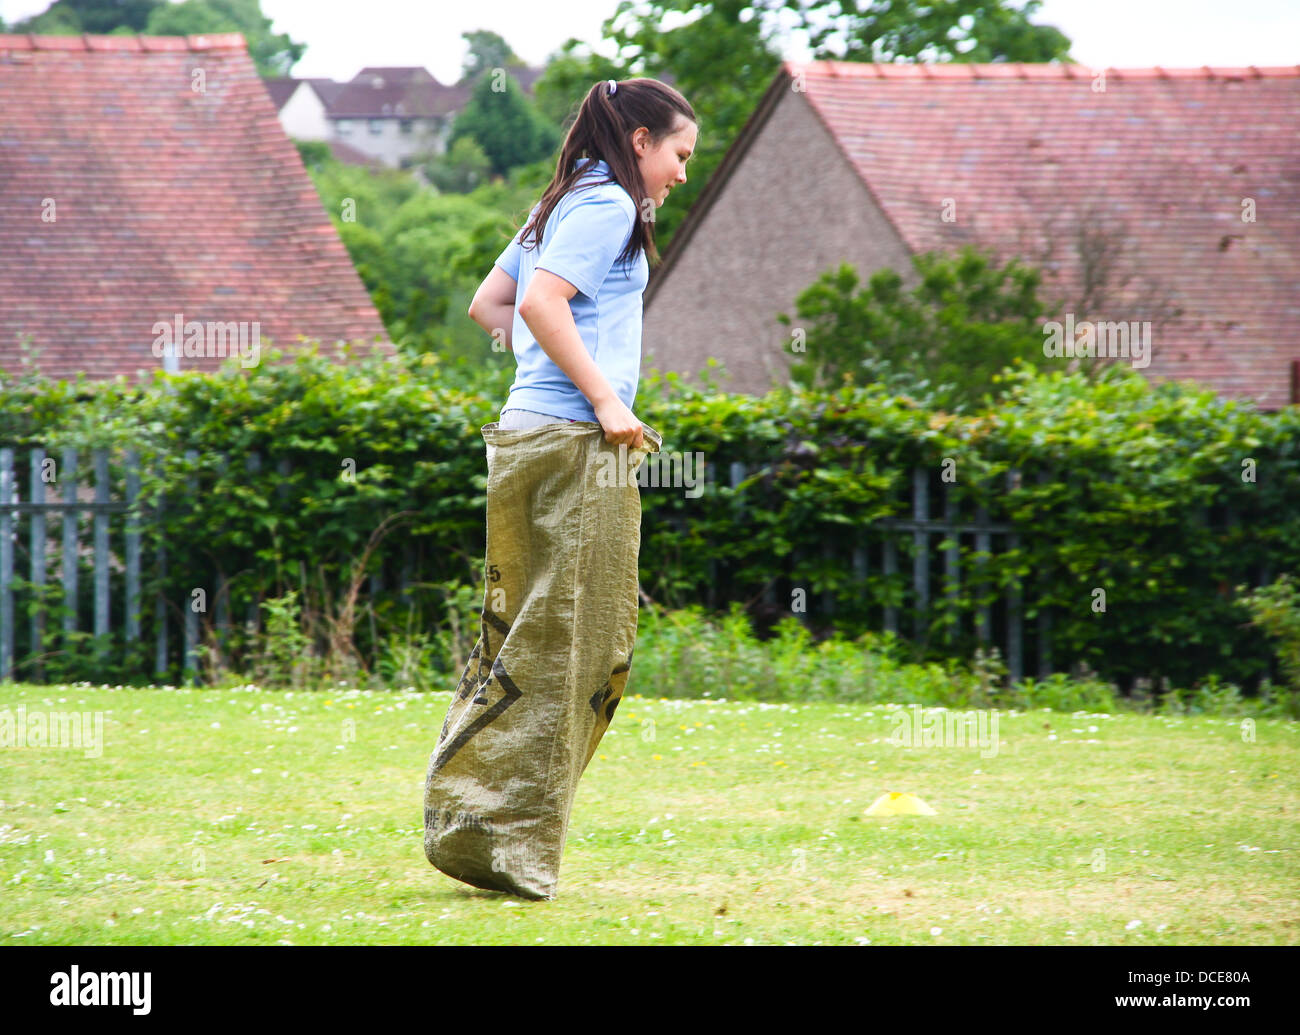 Young girl doing sack race in school sports Stock Photo